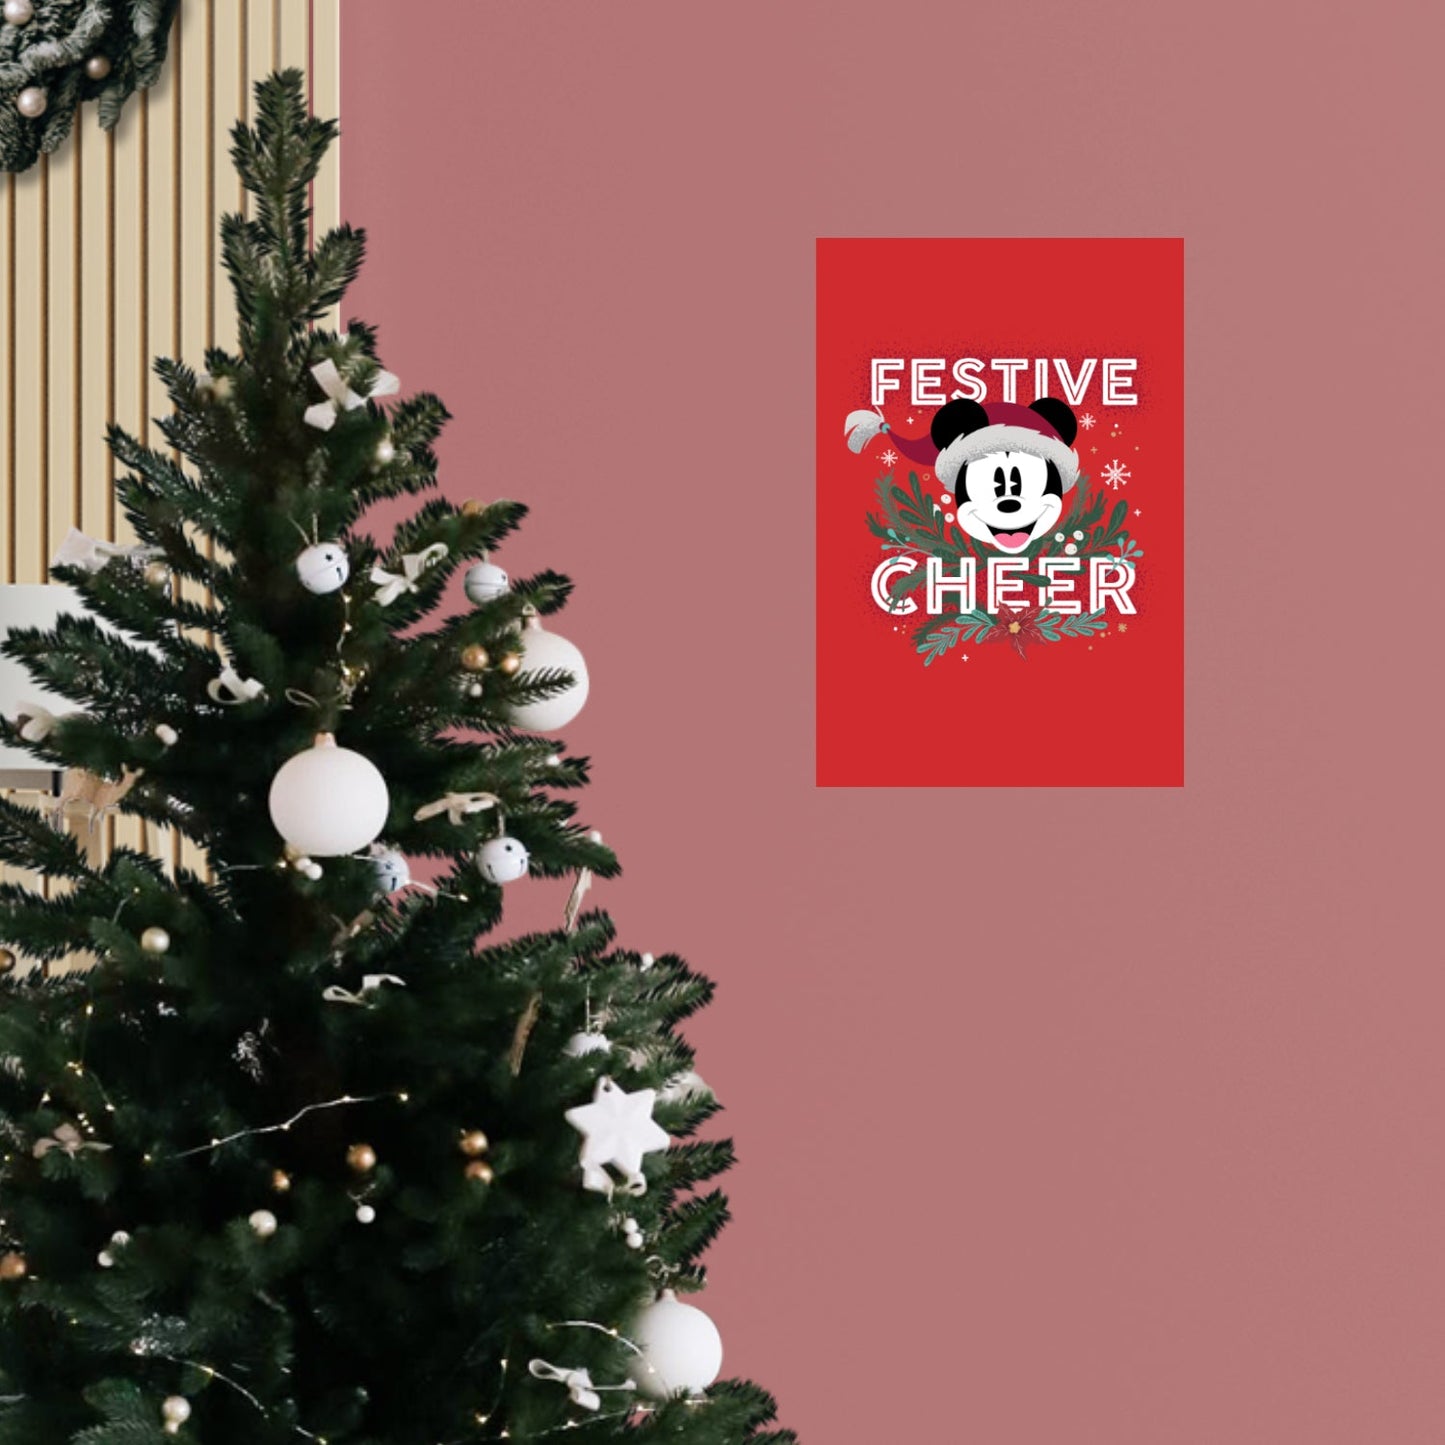 Mickey and Friends Festive Cheer: Mickey Mouse Festive Cheer Mural - Officially Licensed Disney Removable Adhesive Decal